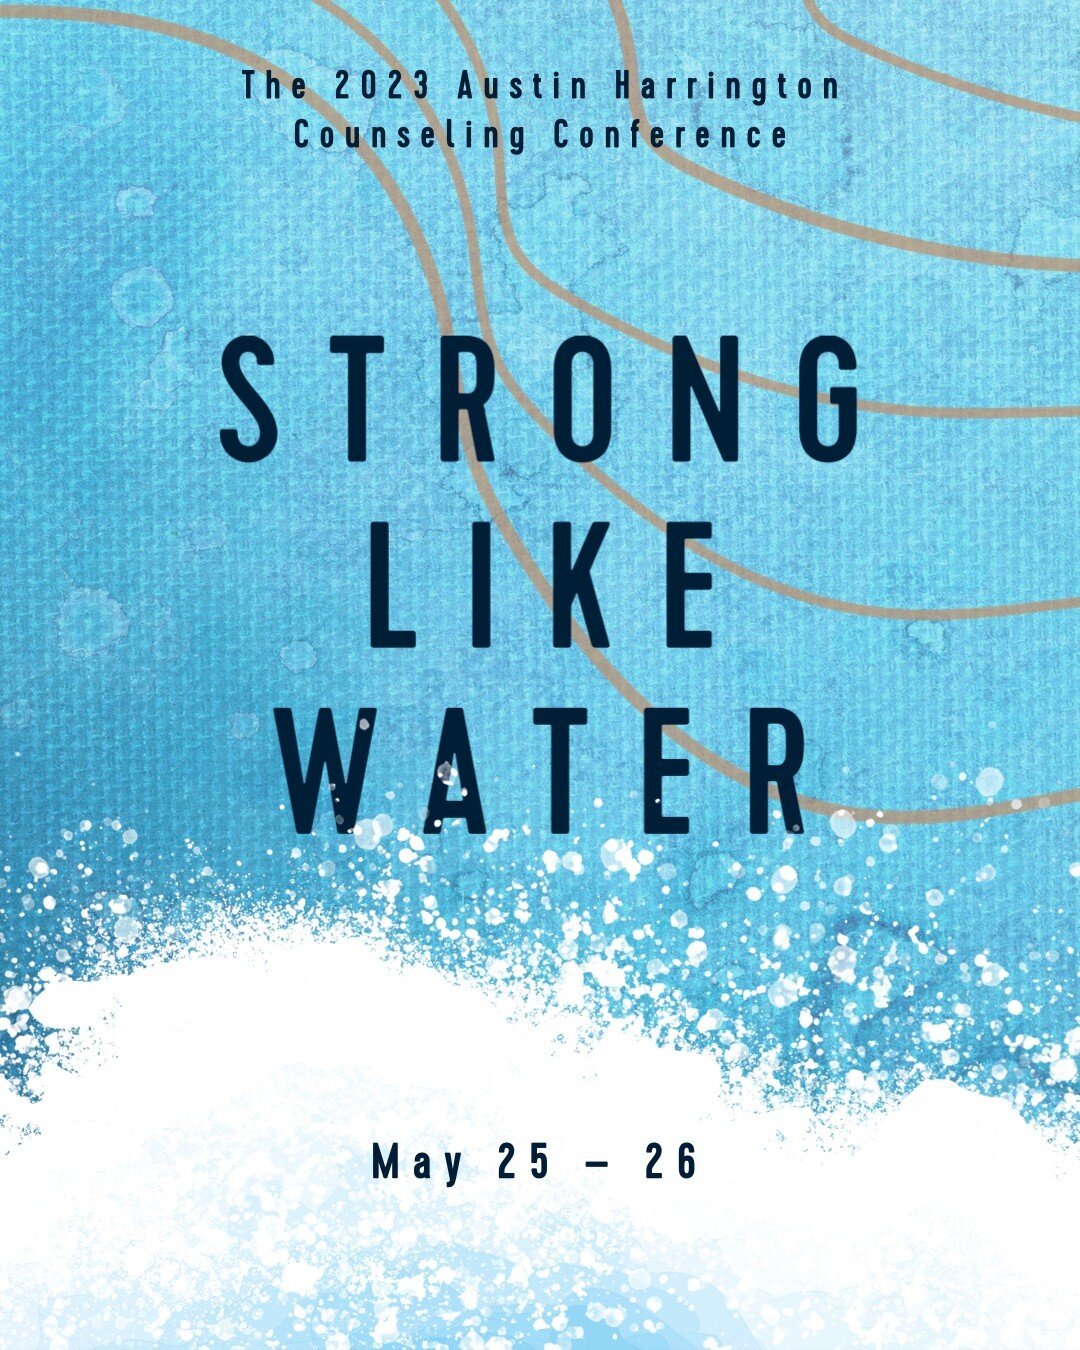 We look forward to seeing everyone tomorrow for the #StrongLikeWater conference! If you haven't registered yet there's still time to sign up. Link in bio.